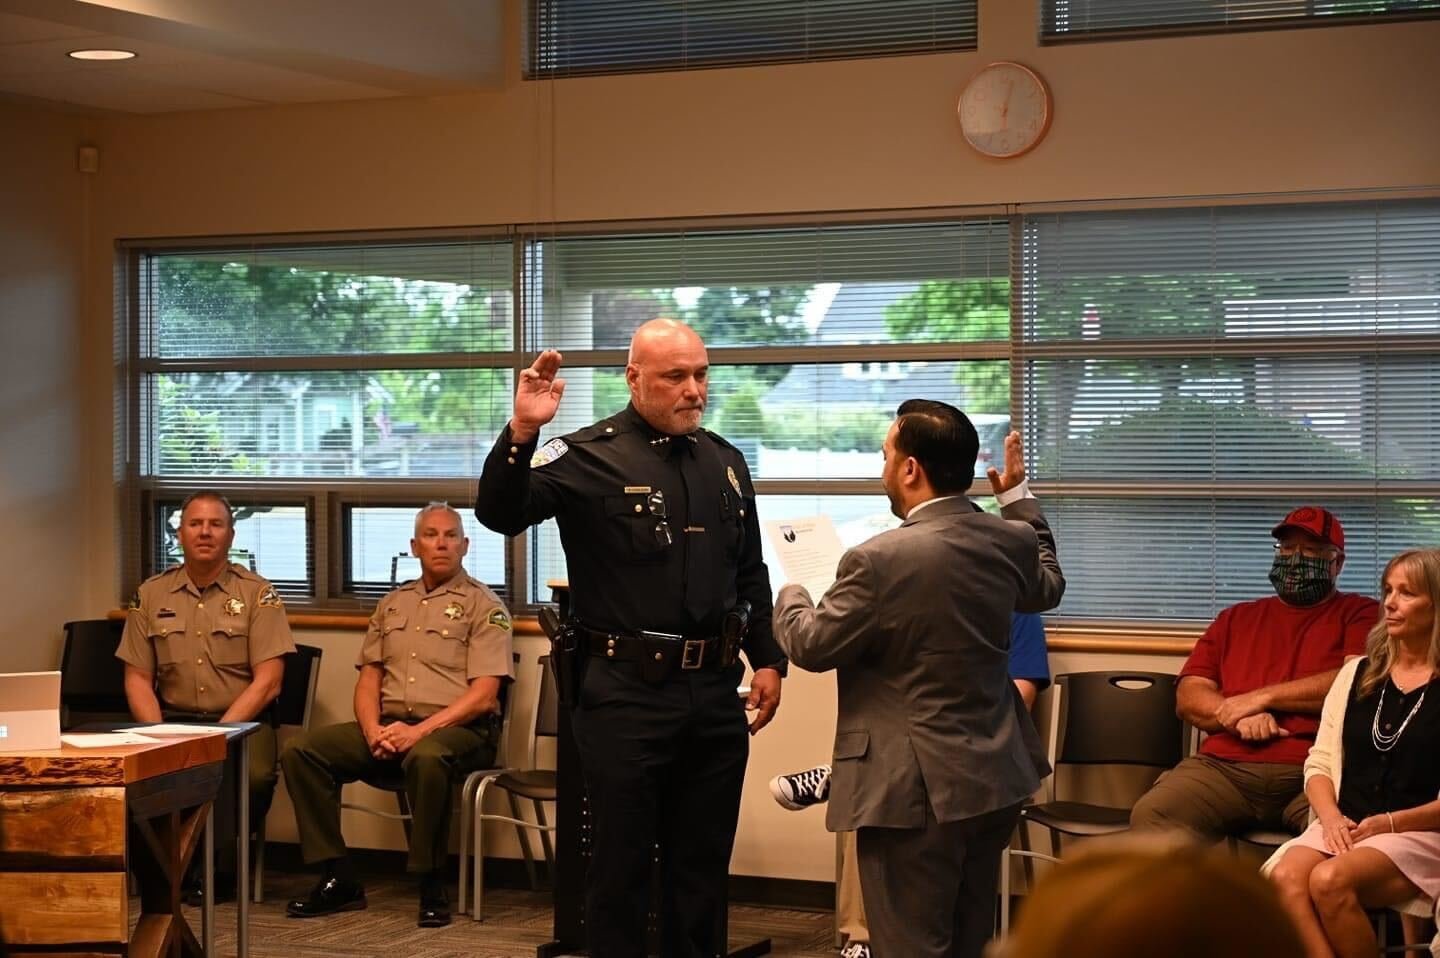 Rob Carlson is sworn in as Yelm’s new chief of police by Mayor Joe DePinto at a meeting on Tuesday, June 28.